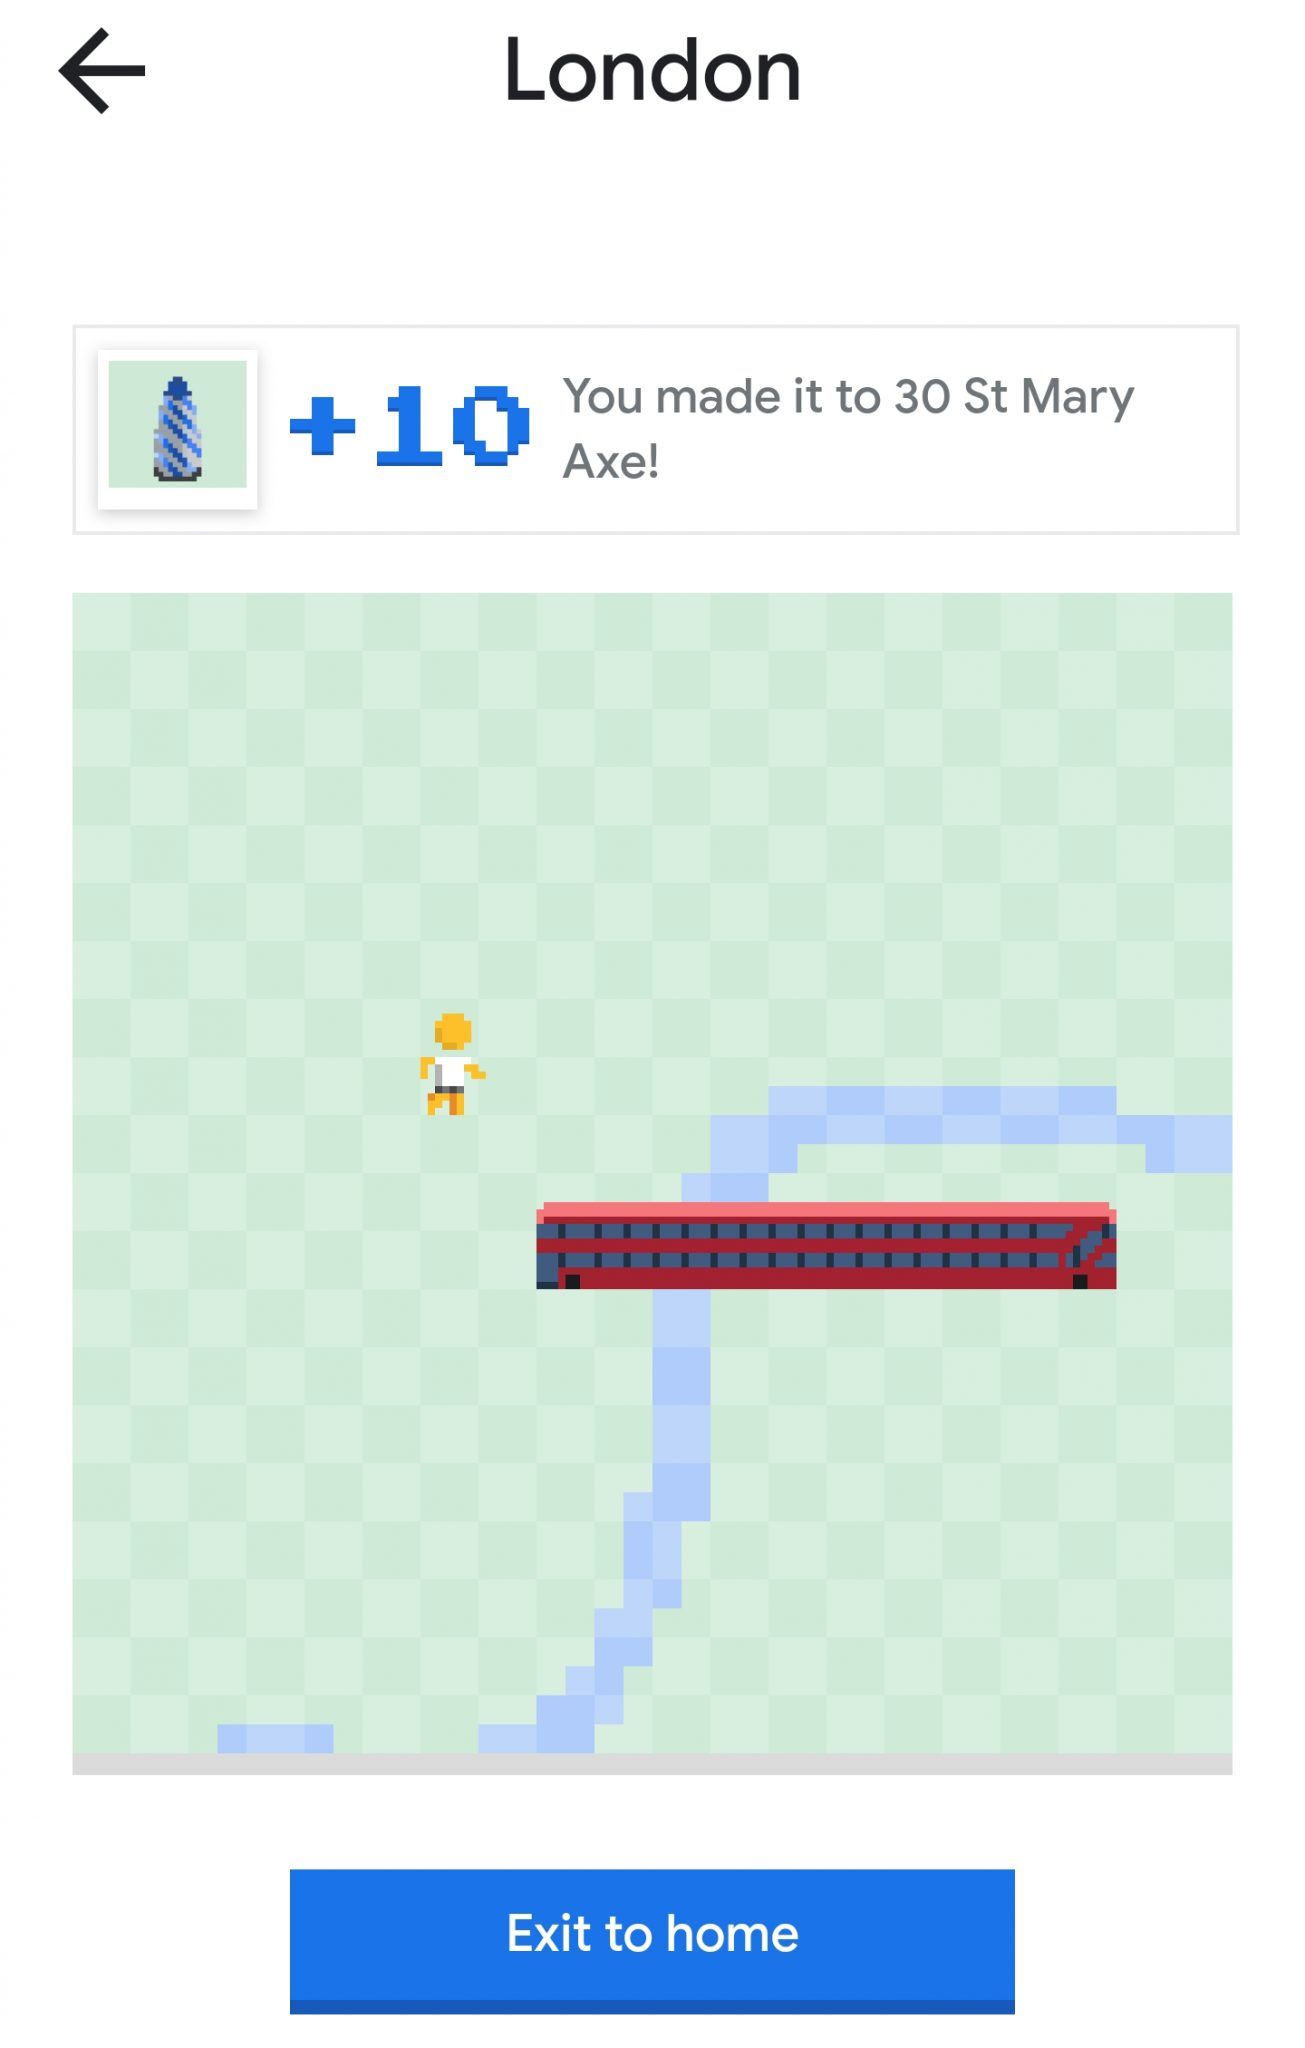 You can now play the classic game Snake on Google Maps